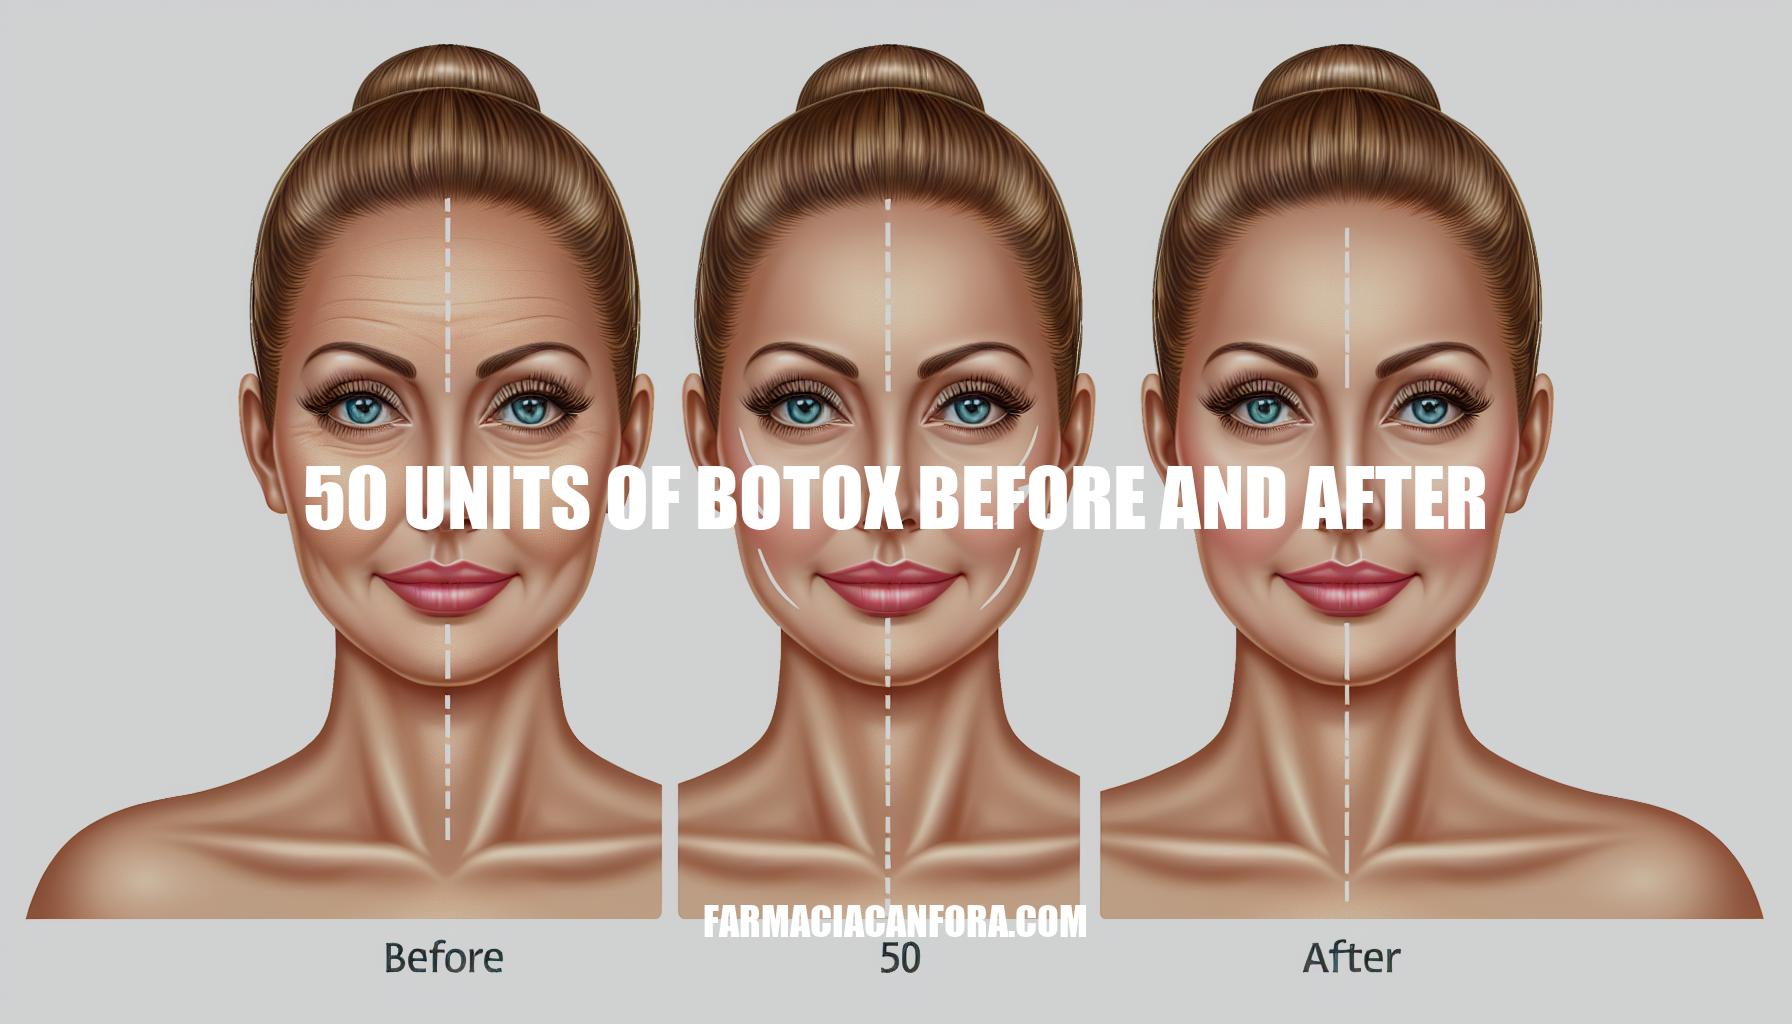 The Impact of 50 Units of Botox Before and After